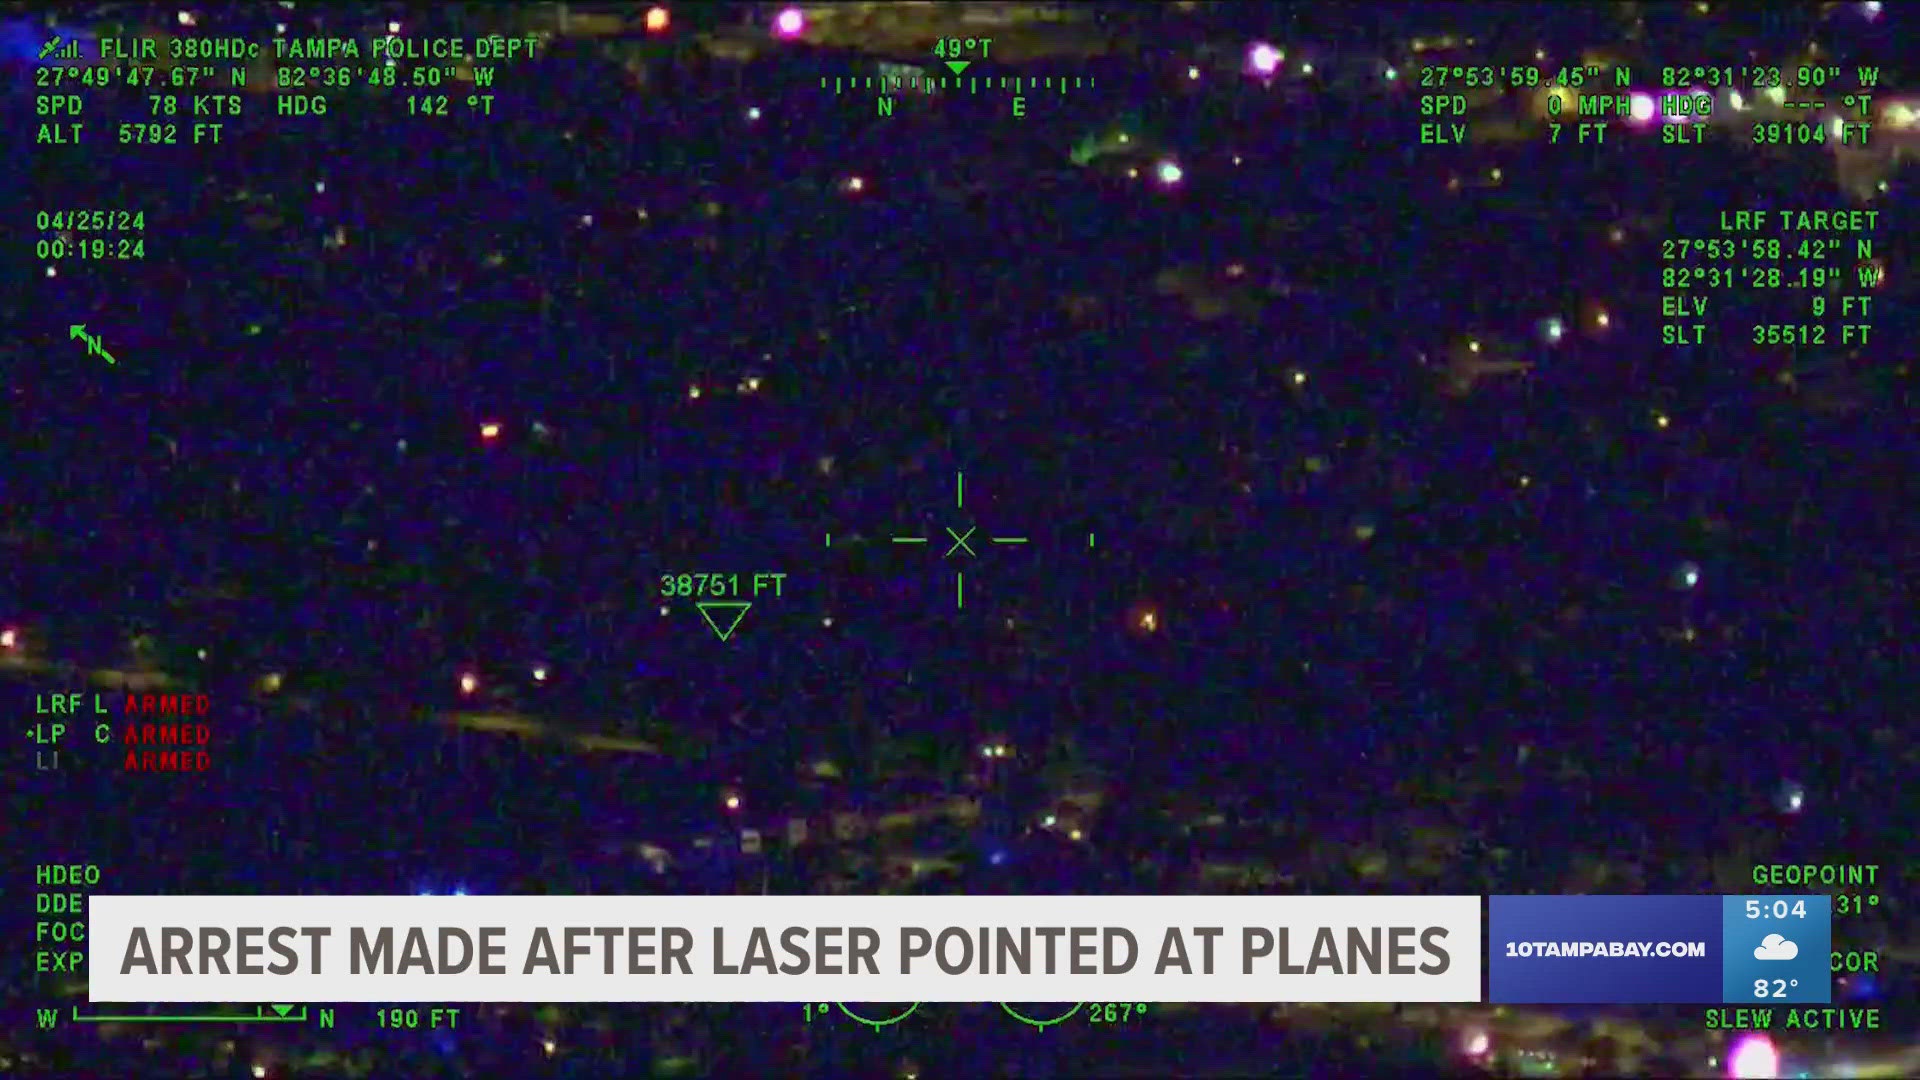 Tampa Police said they've investigated at least 40 incidents of lasers pointed at planes since the start of 2024.